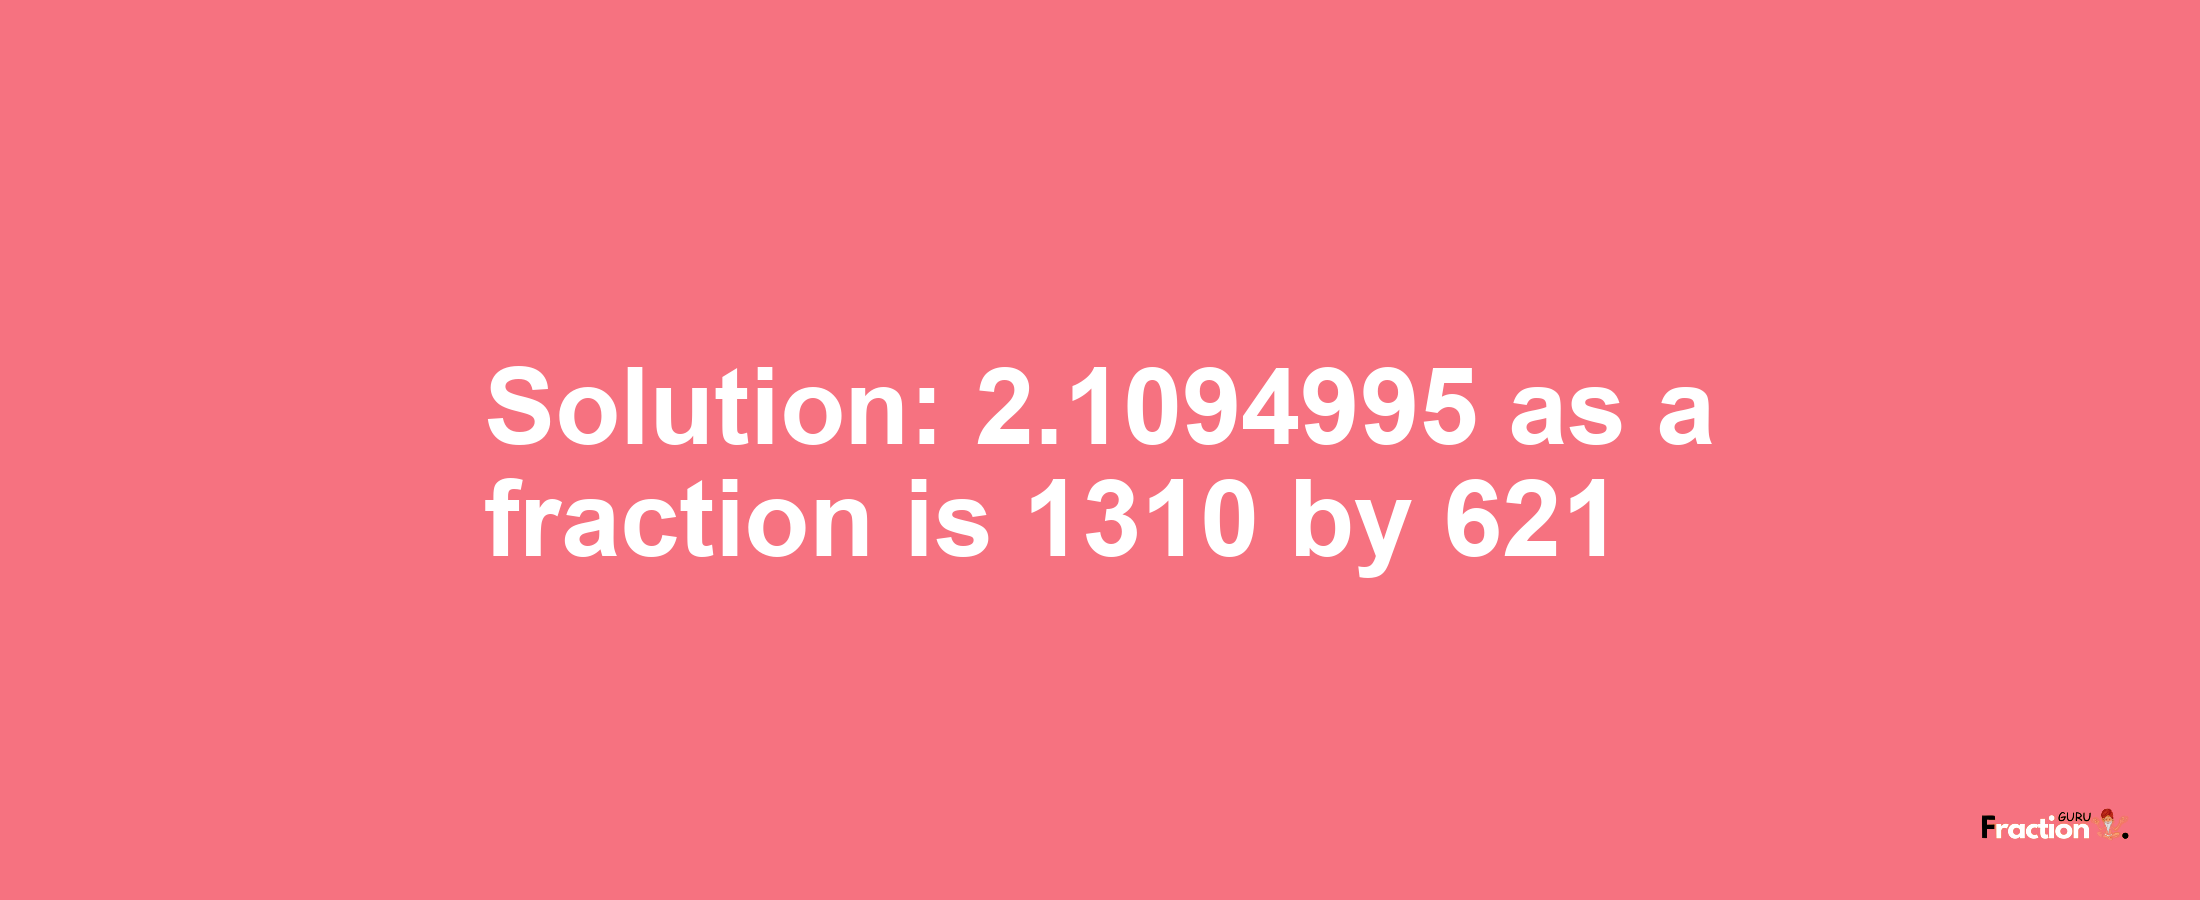 Solution:2.1094995 as a fraction is 1310/621